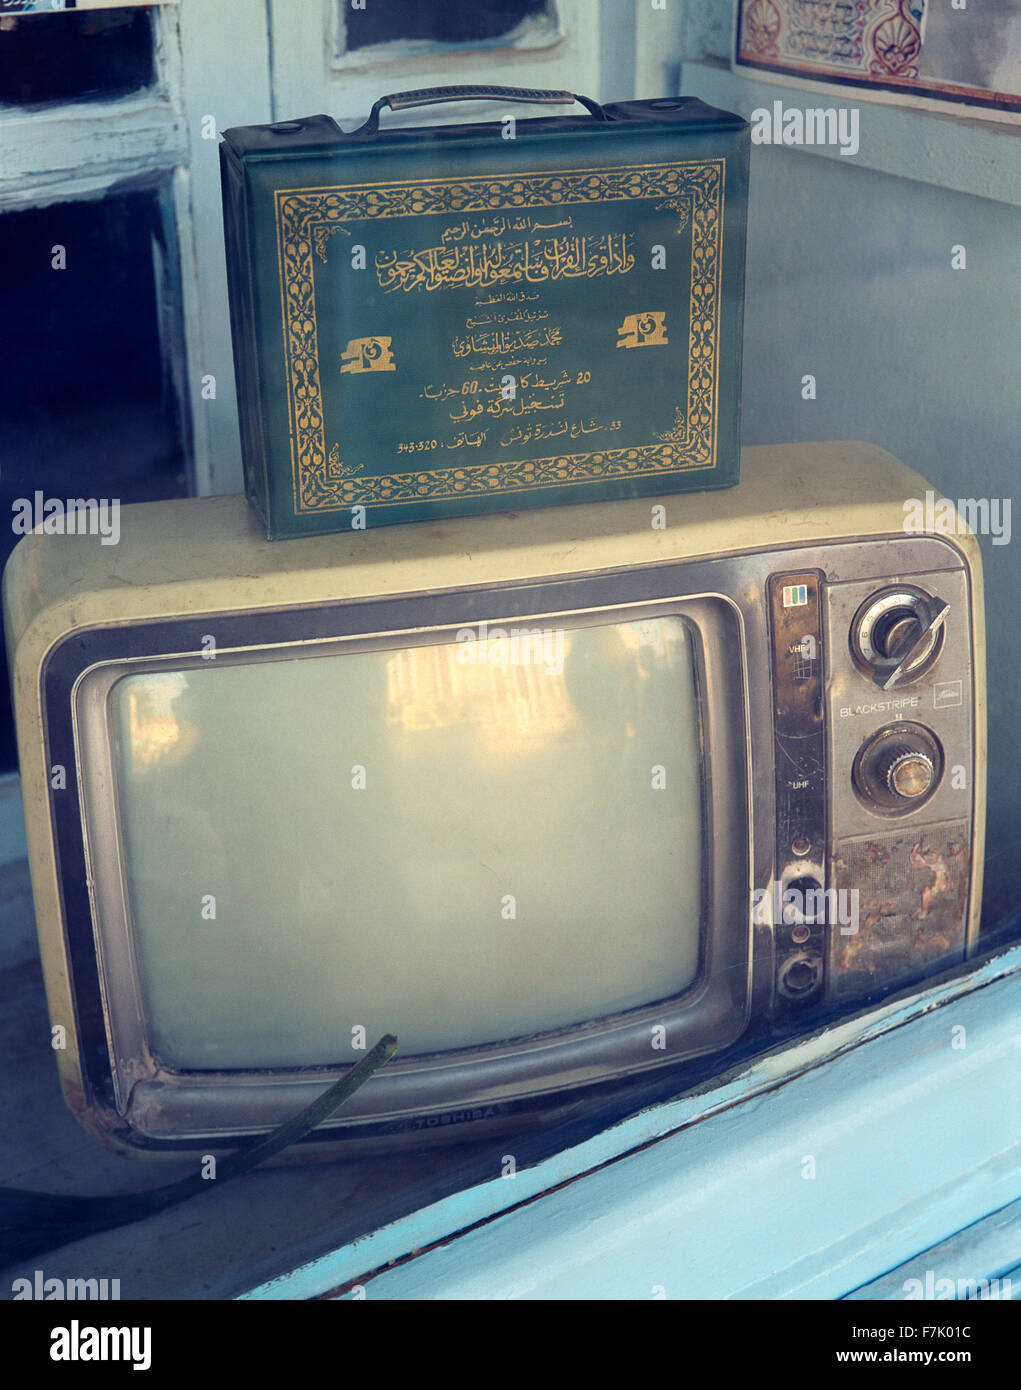 A vintage television in a shop window in Tataouine, Tunisia, North Africa. Stock Photo